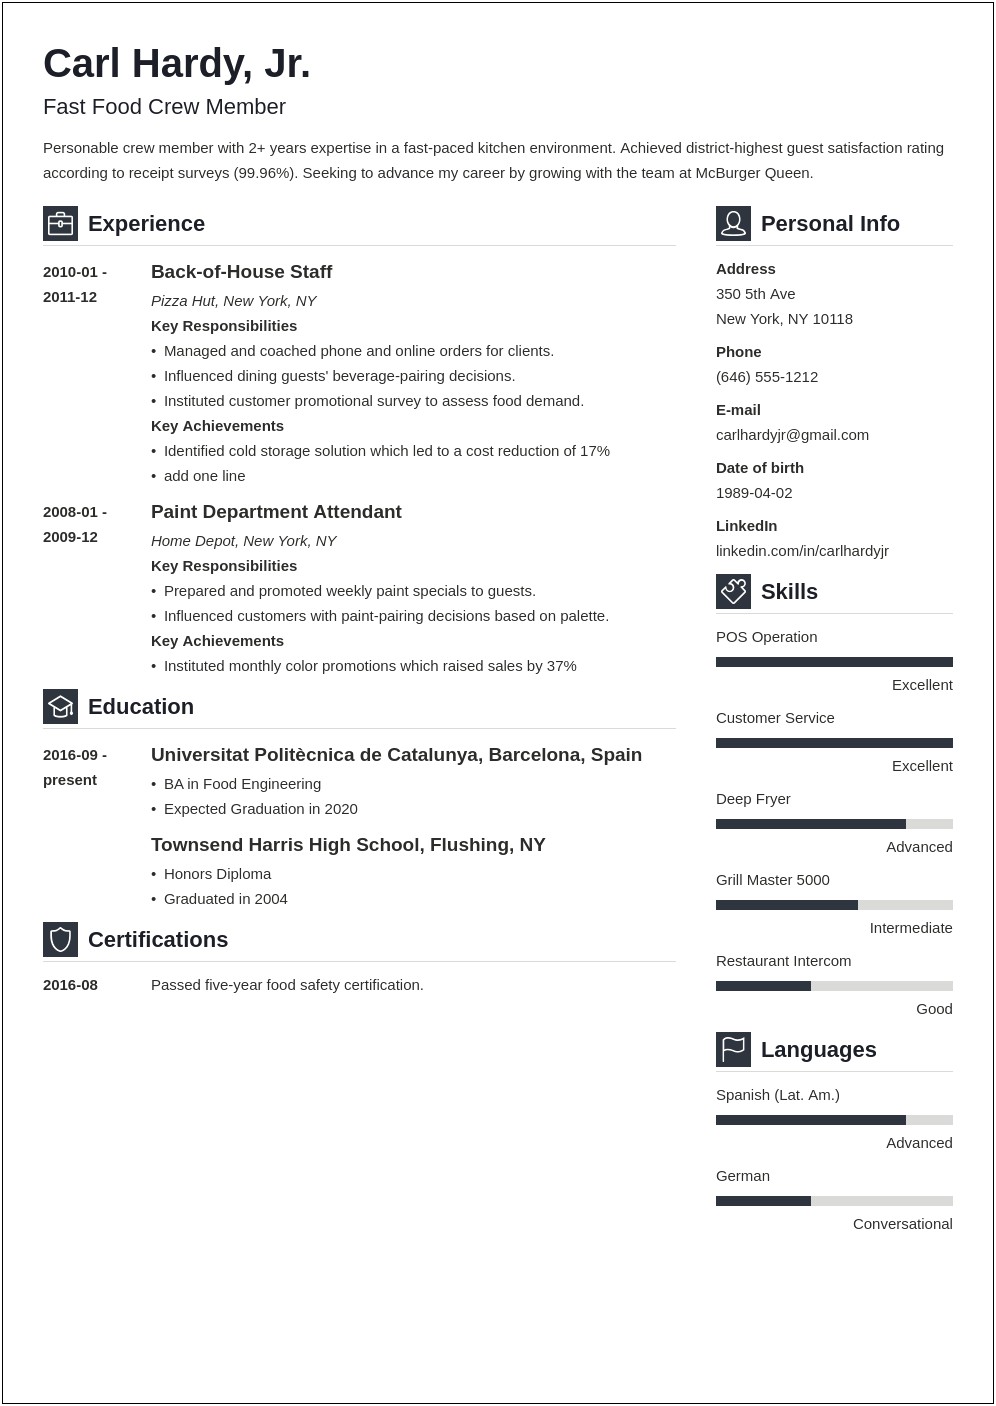 Sample Resume With Fast Food Experience